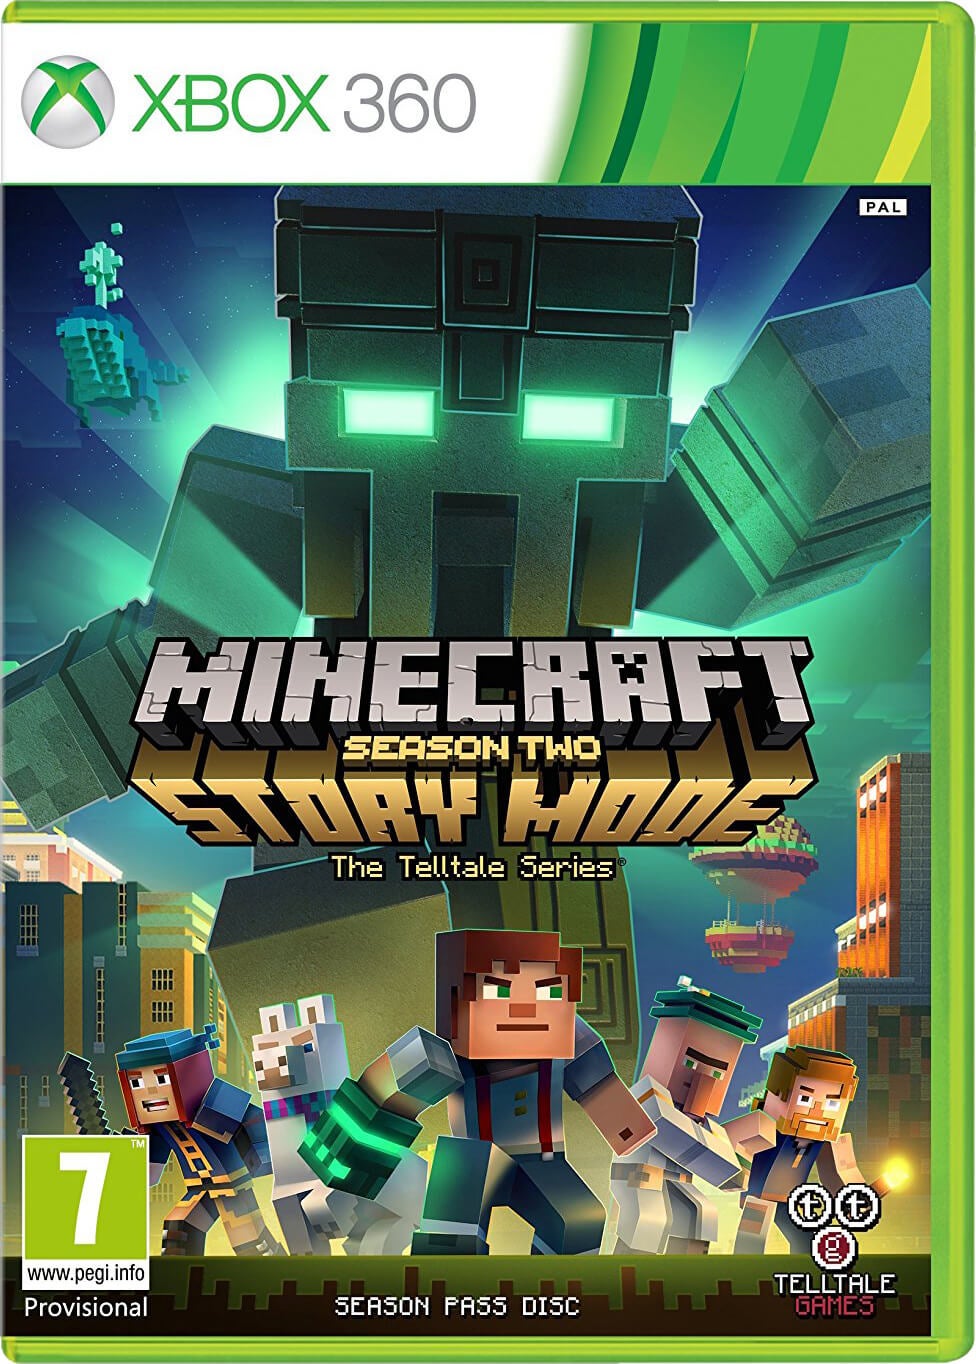 Exclusive: Netflix to bring Minecraft: Story Mode to service - but not  traditional games